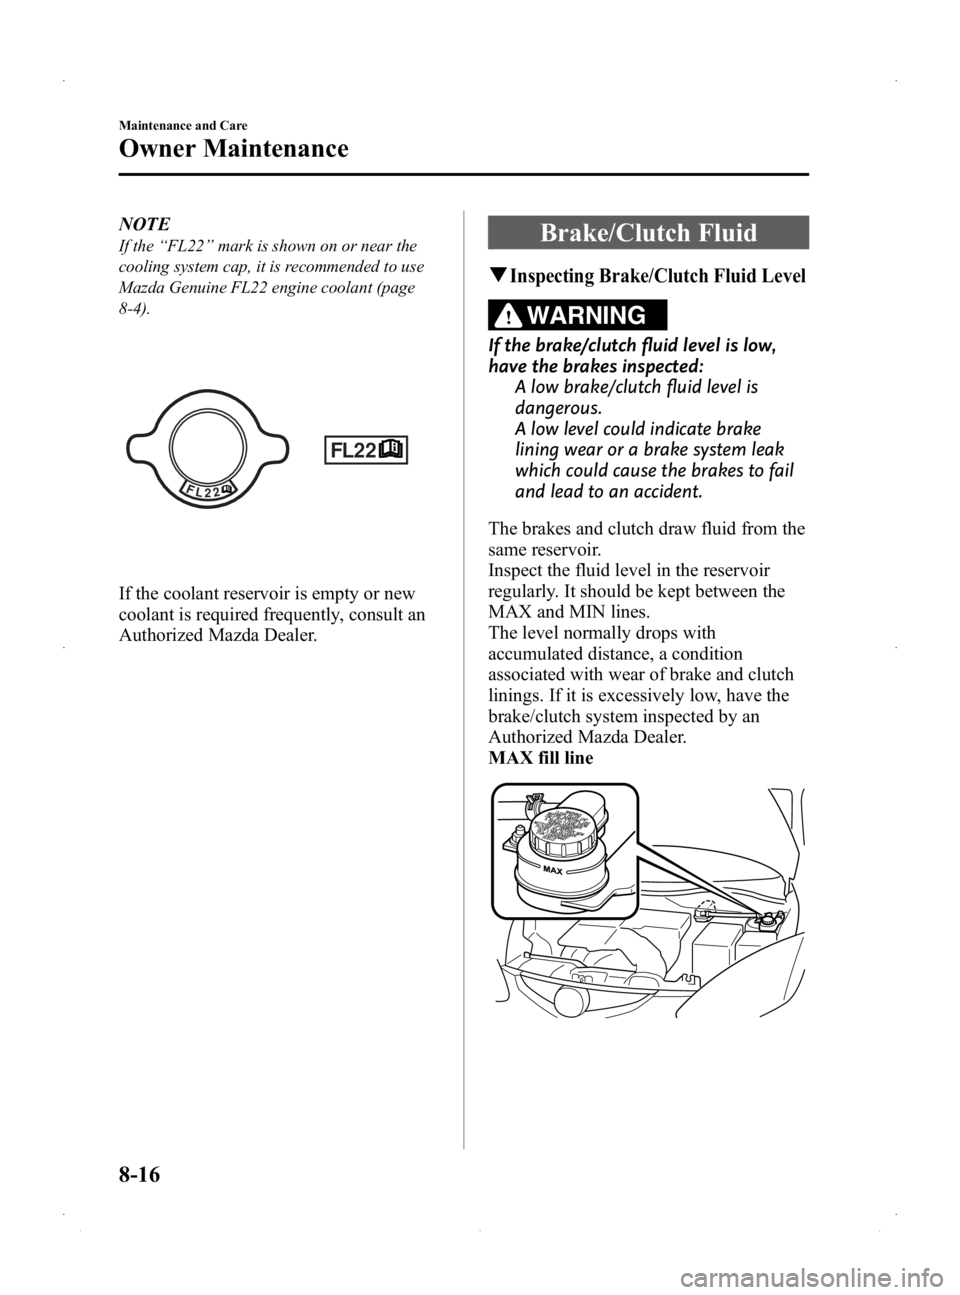 MAZDA MODEL 2 2014  Owners Manual Black plate (260,1)
NOTE
If the“FL22” mark is shown on or near the
cooling system cap, it is recommended to use
Mazda Genuine FL22 engine coolant (page
8-4).
If the coolant reservoir is empty or n